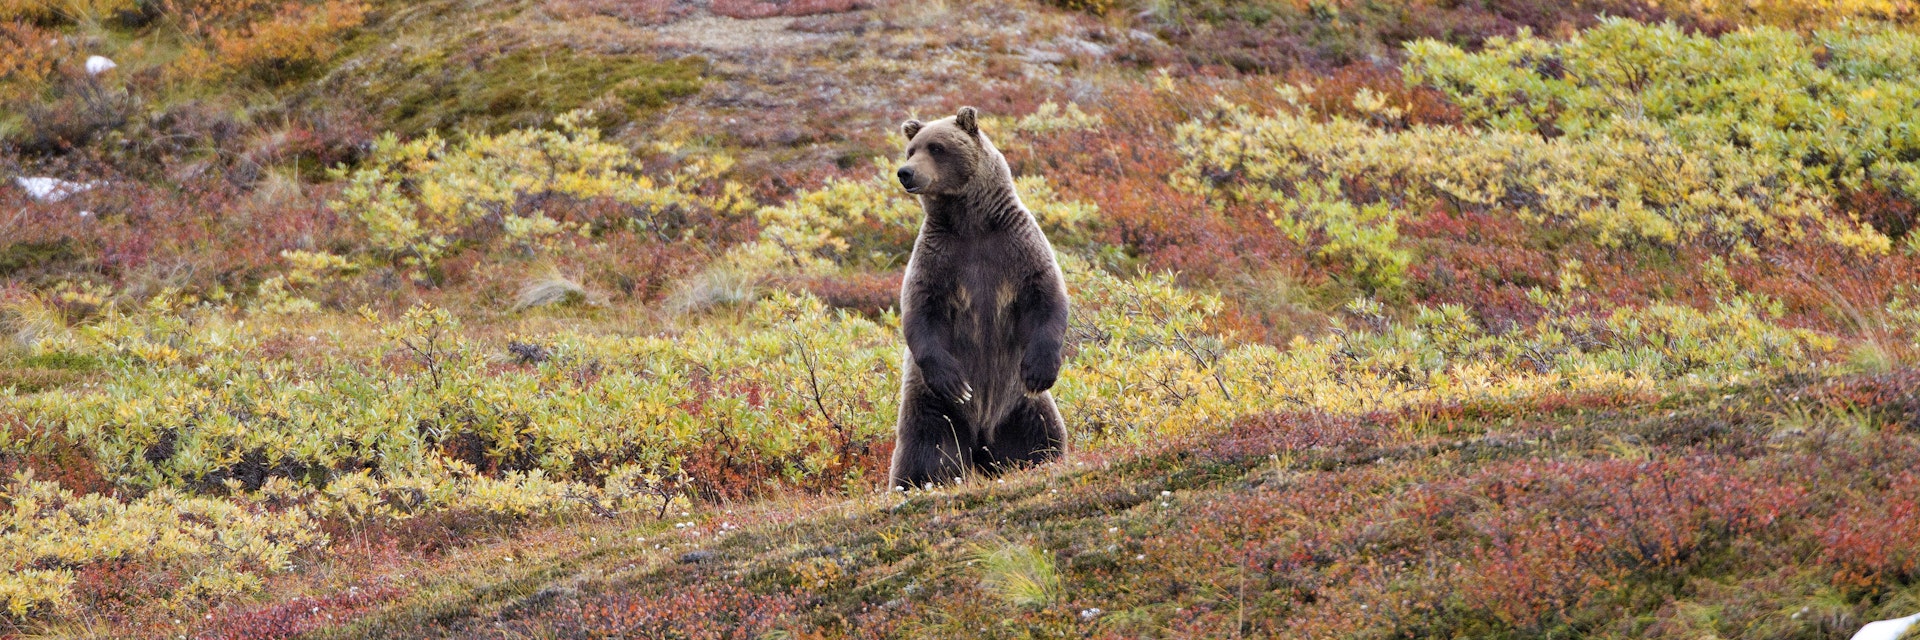 Grizzly bears are the pre-eminent predators in Denali National Park.